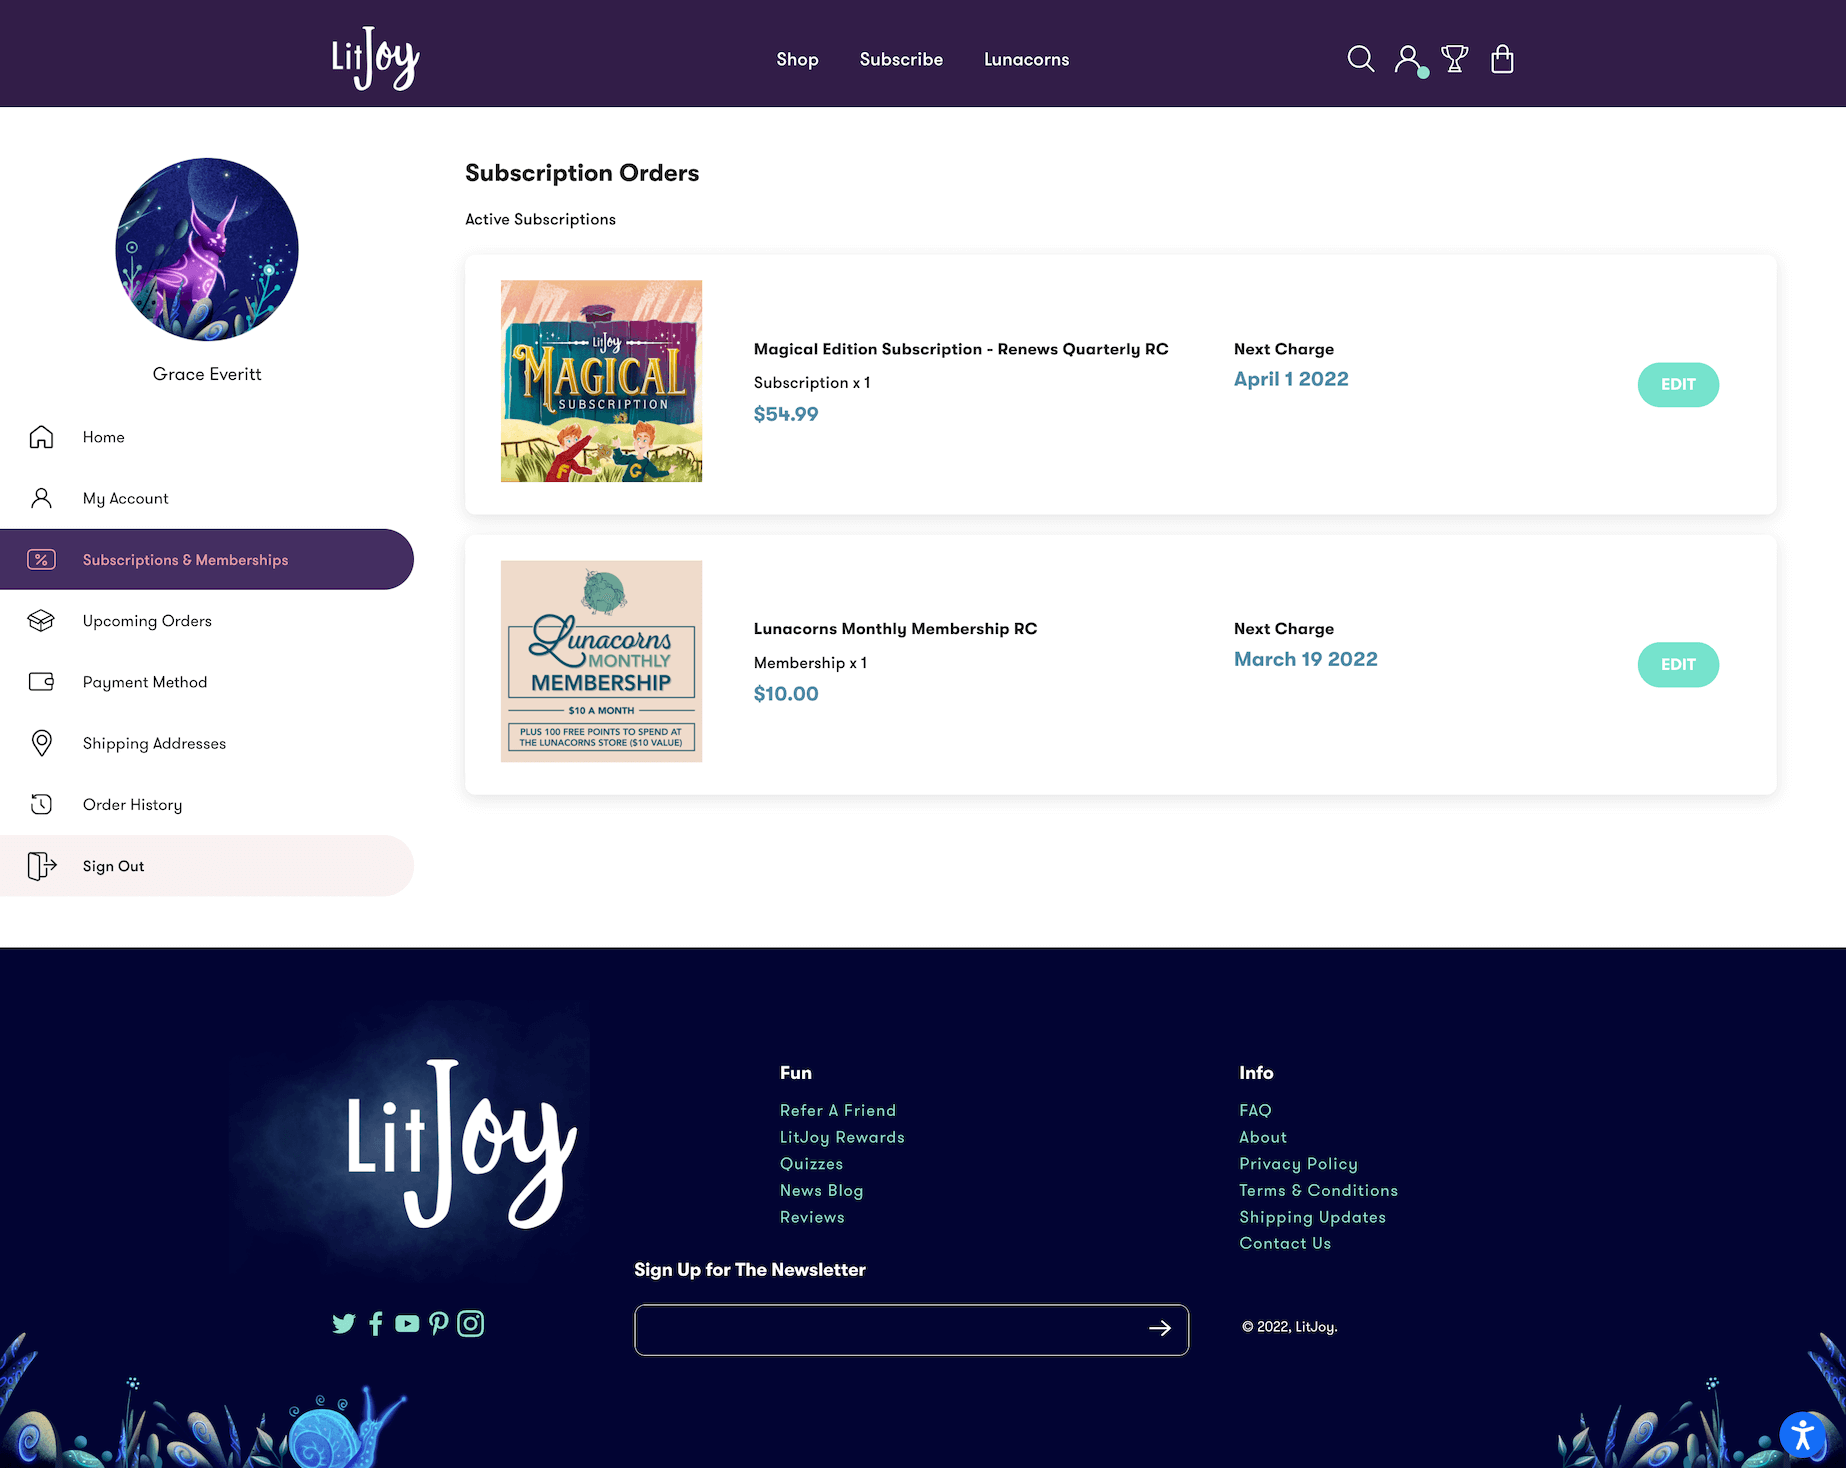 LitJoy increased AOV by 41% with a seamless, stable customer portal